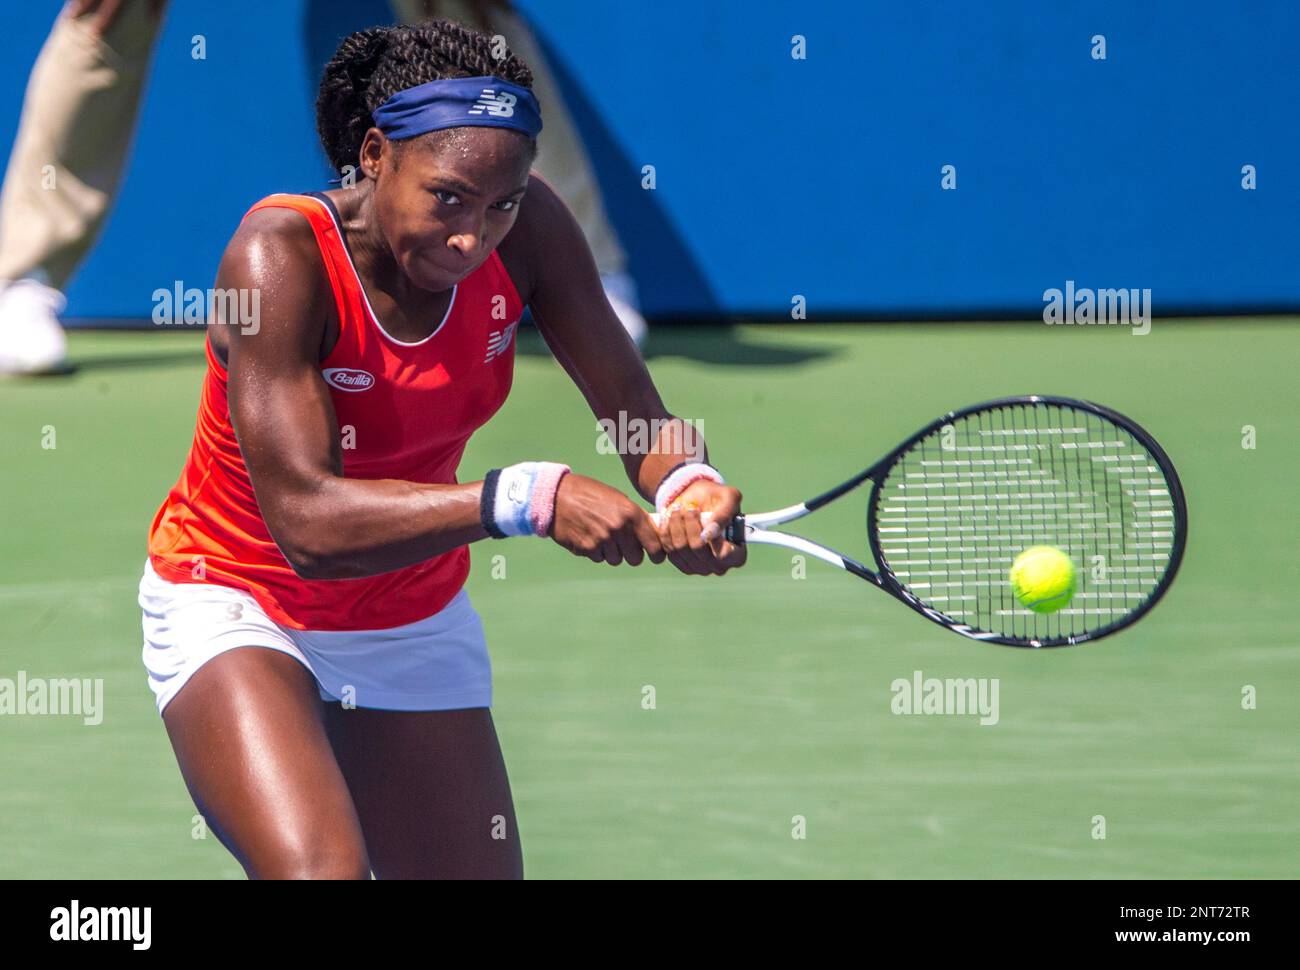 WASHINGTON D.C. - JULY 27: Cori Gauff in action during a Women's Singles  qualifying round match against Maegan Manasse in the 2019 Citi Open, on  July 27, 2019, at the Rock Creek